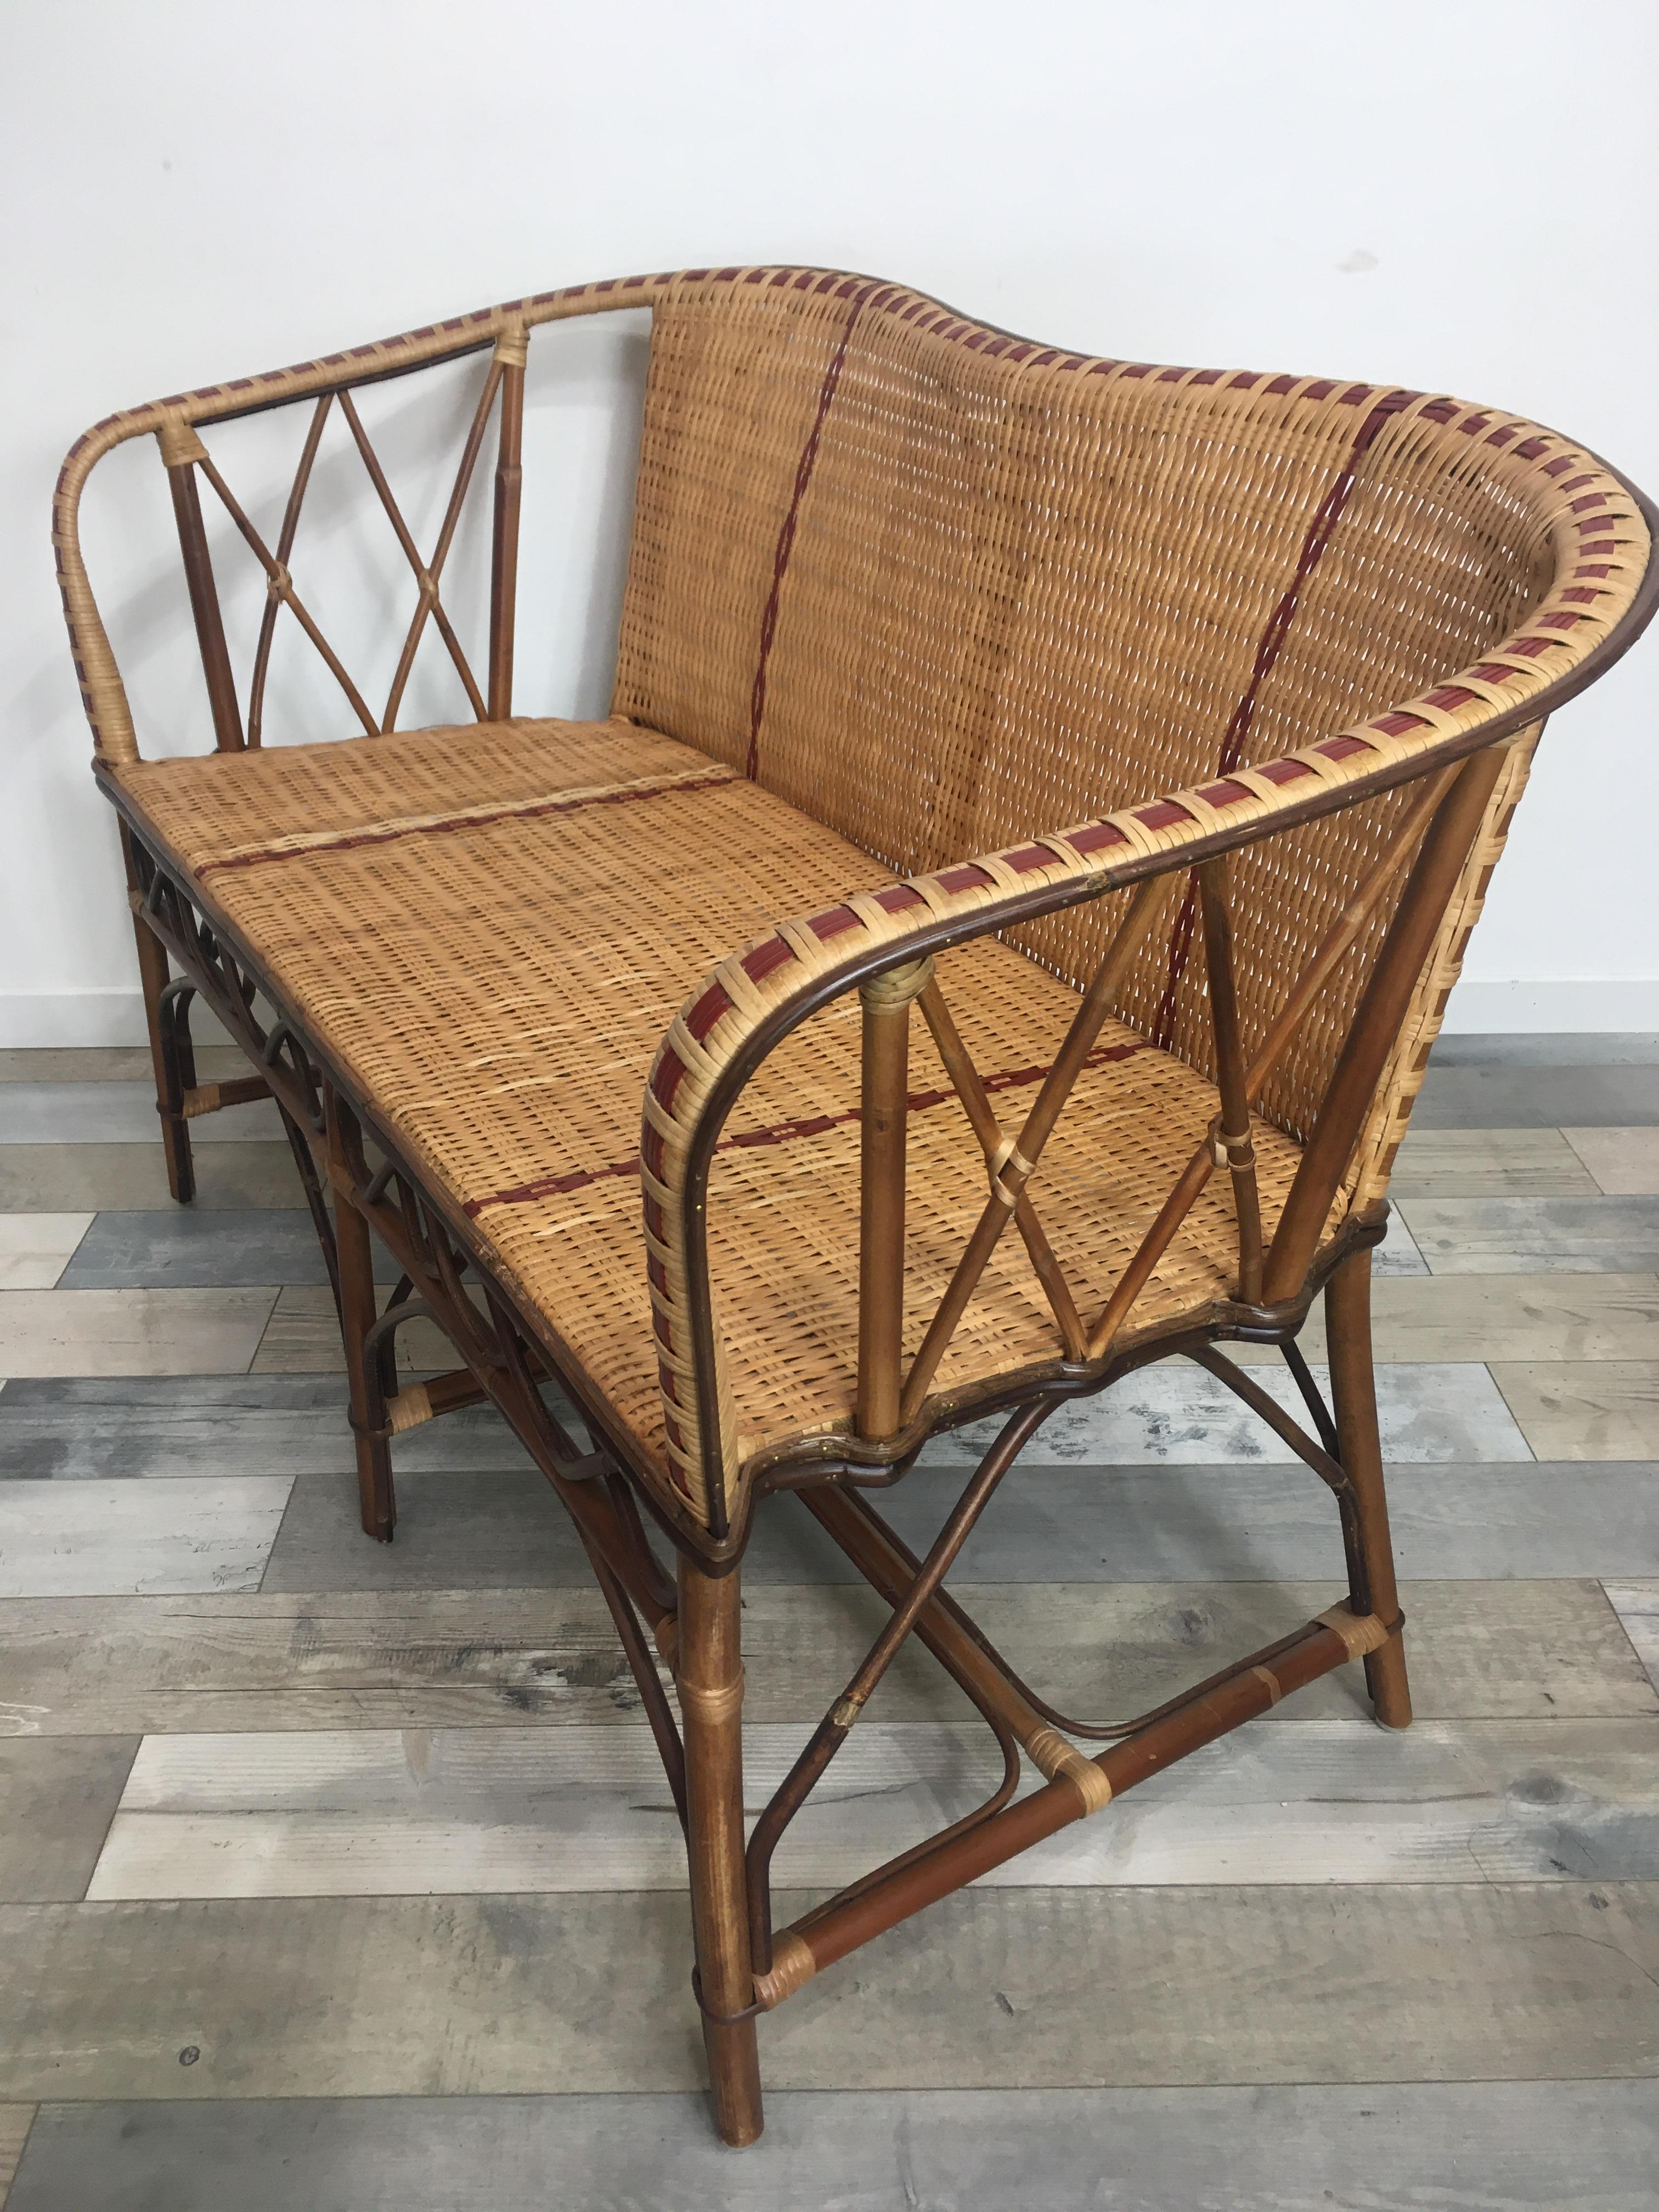 Art Nouveau French 1900s Design Bistro Style Sofa In Rattan and Braided Wicker Cane For Sale